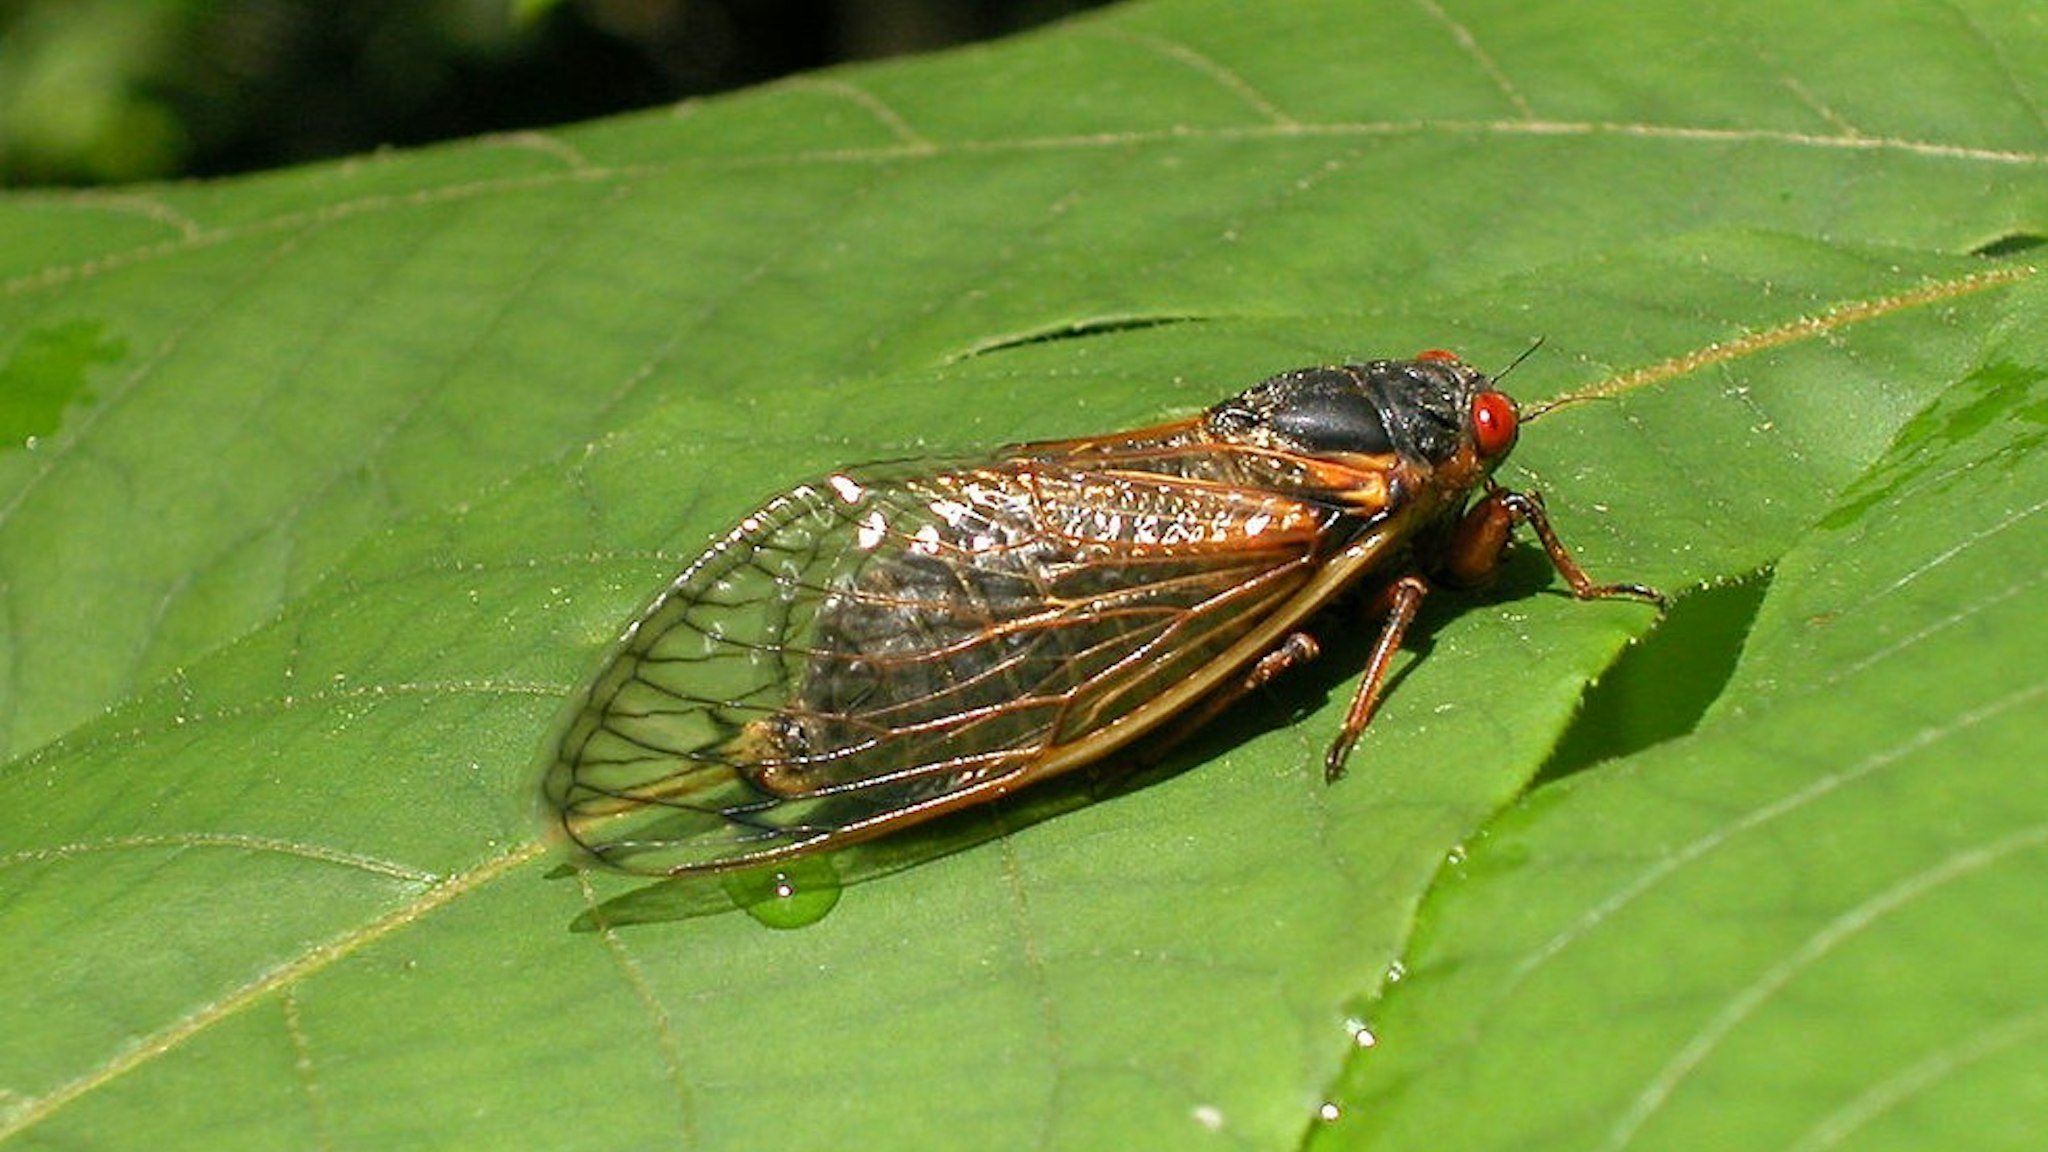 RESON, VA - MAY 16: A newly emerged adult cicada suns itself on a leaf May 16, 2004 in Reston, Virginia. After 17-years living below ground, billions of cicadas belonging to Brood X are beginning to emerge across much of the eastern United States. The cicadas shed their larval skin, spread their wings, and fly out to mate, making a tremendous noise in the process. (Photo by